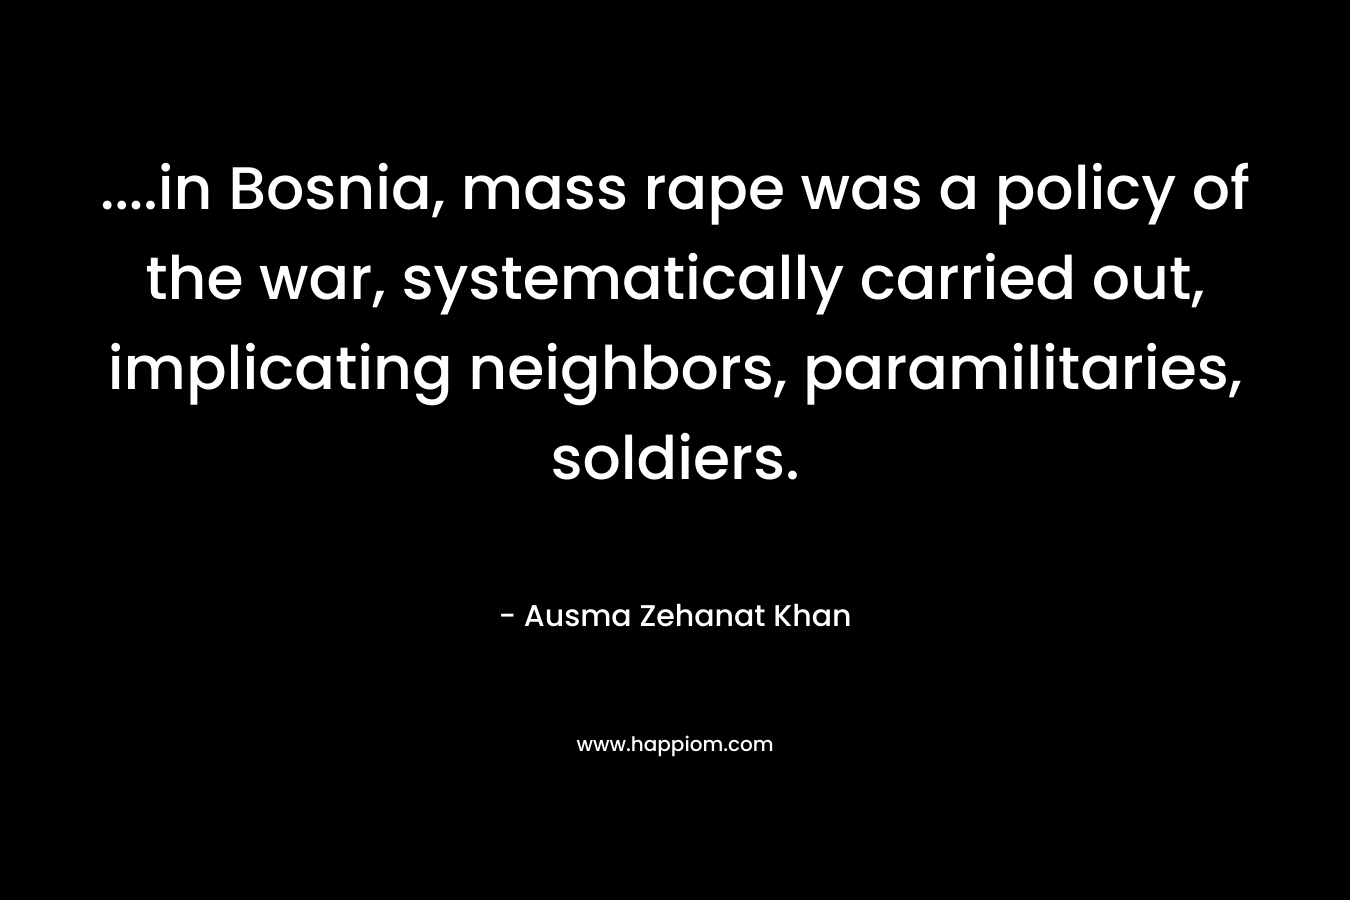 ….in Bosnia, mass rape was a policy of the war, systematically carried out, implicating neighbors, paramilitaries, soldiers. – Ausma Zehanat Khan